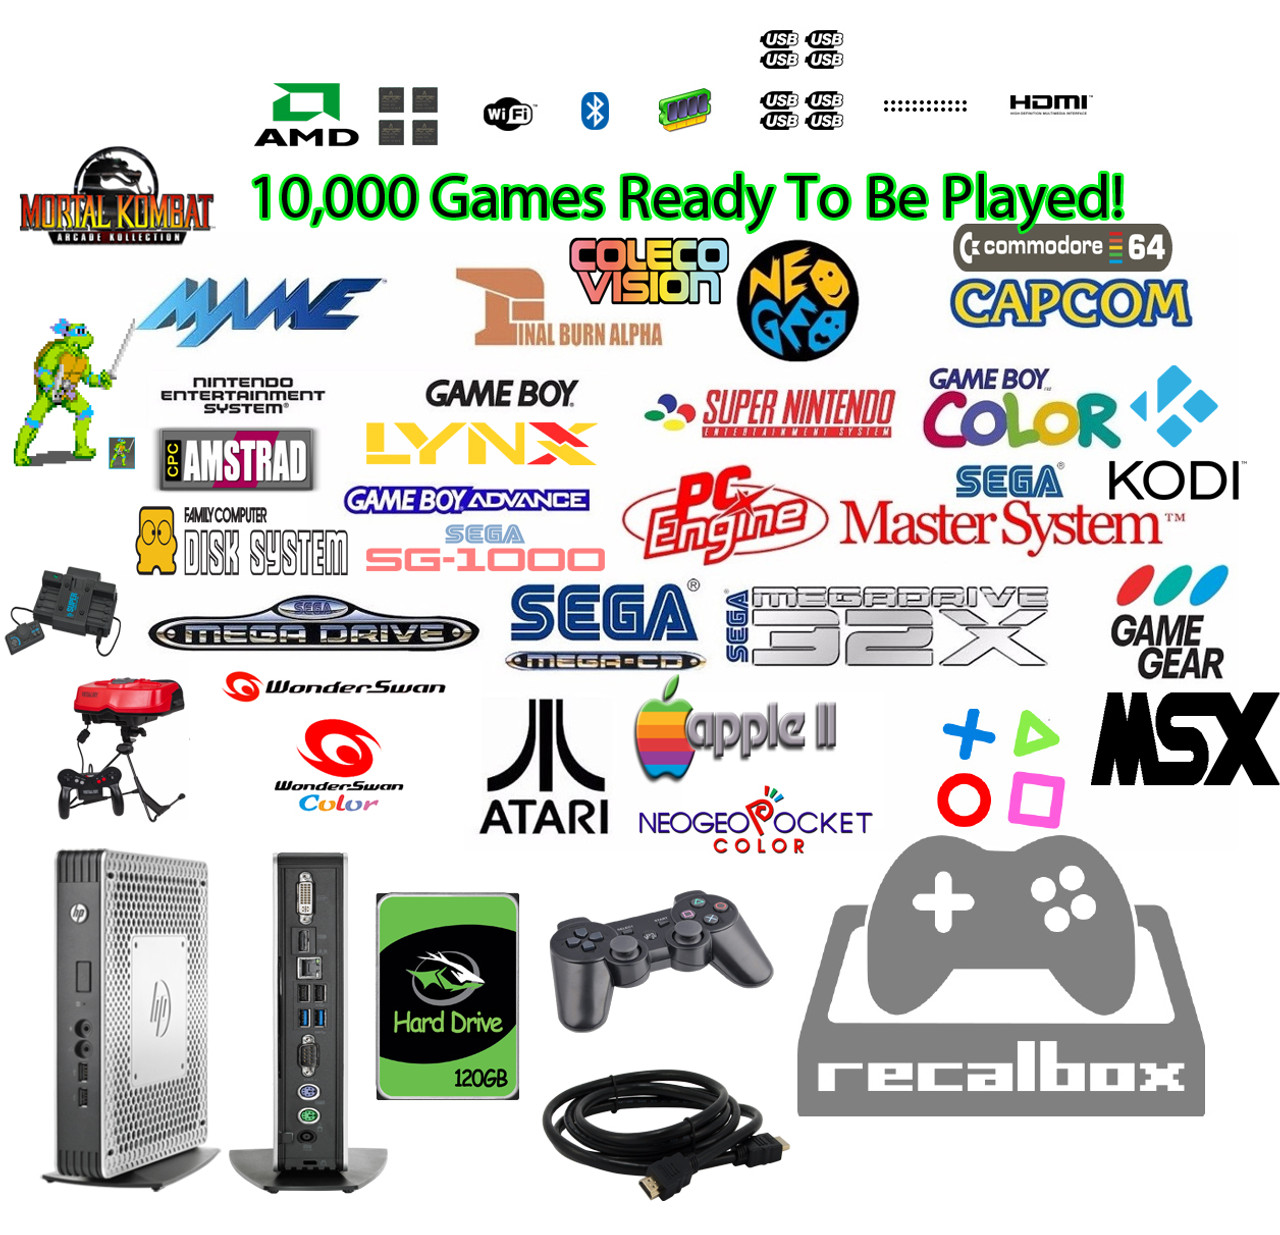 4TB USB Game Hard Drive - RPCS3 for PC / PS3 Console Loaded 300+ Games  Hyperspin - Custom Game Case